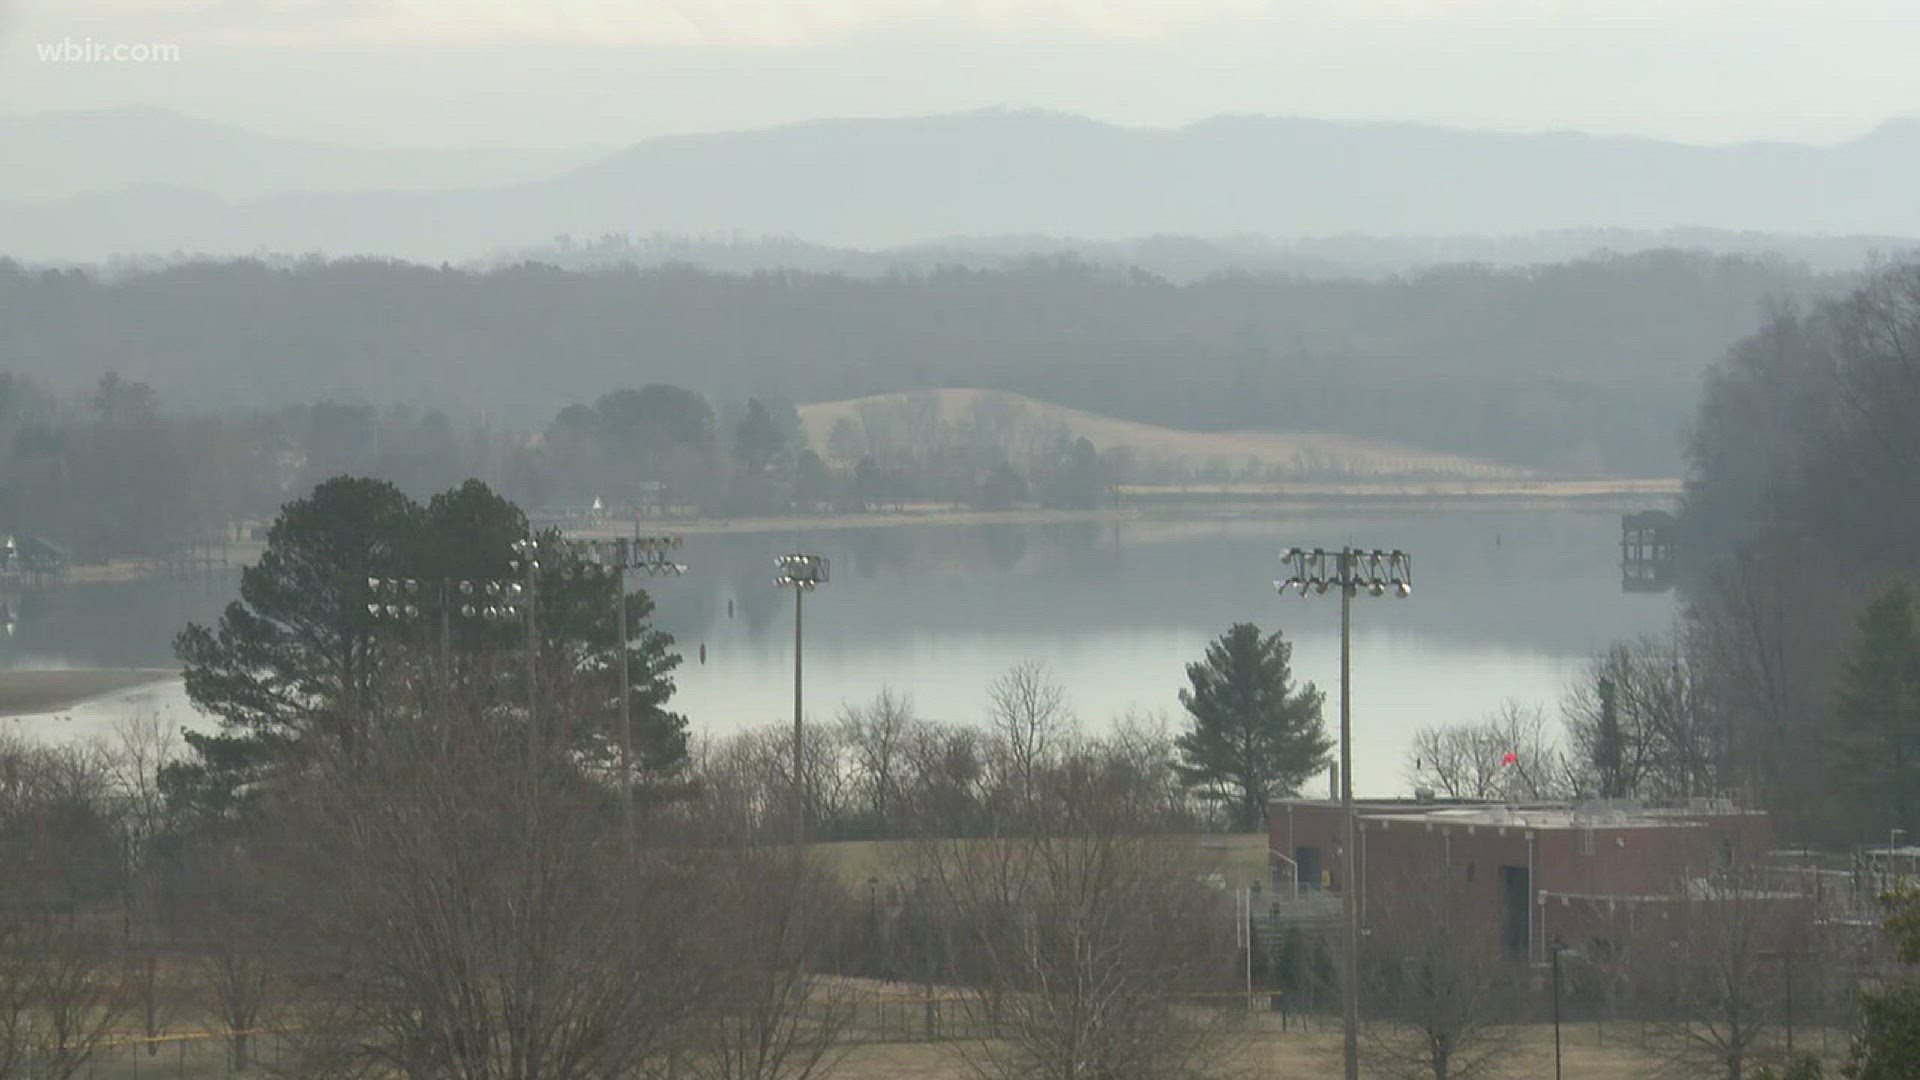 Jan. 22, 2018: Scripps Networks is donating $3 million to Lakeshore Park in West Knoxville to build a new scenic overlook.